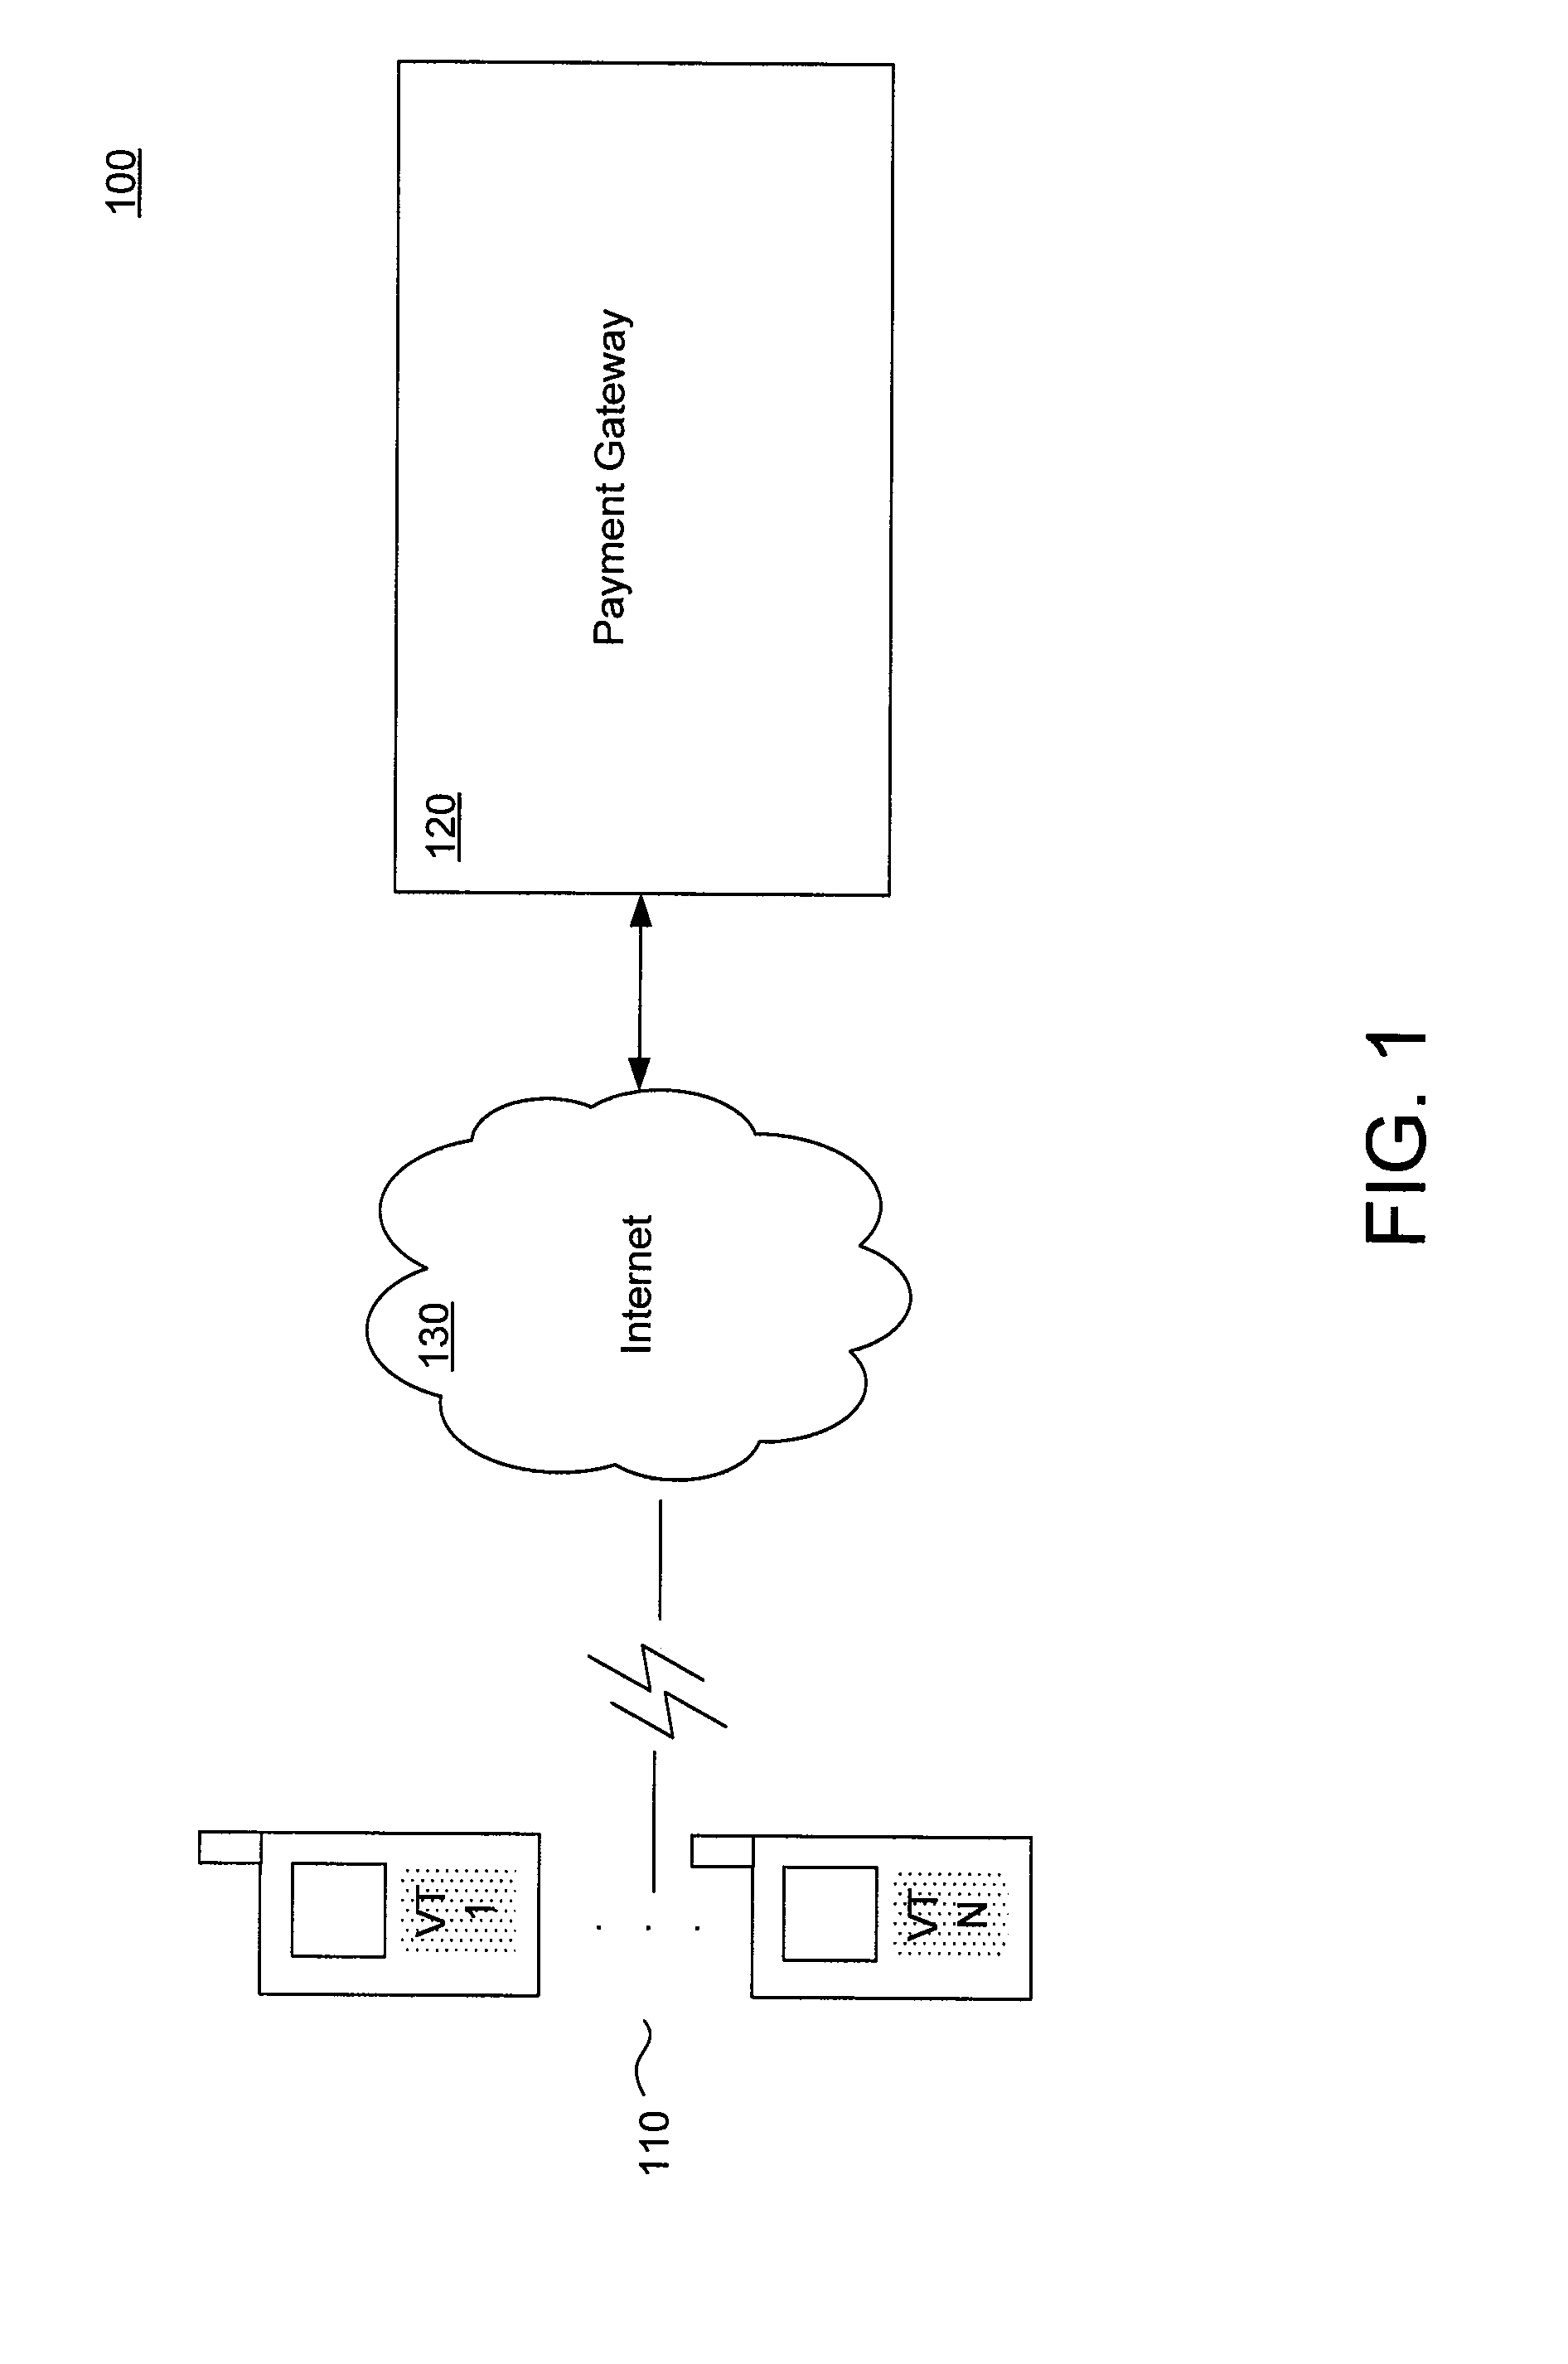 Method and System for Processing Secure Wireless Payment Transactions and for Providing a Virtual Terminal for Merchant Processing of Such Transactions